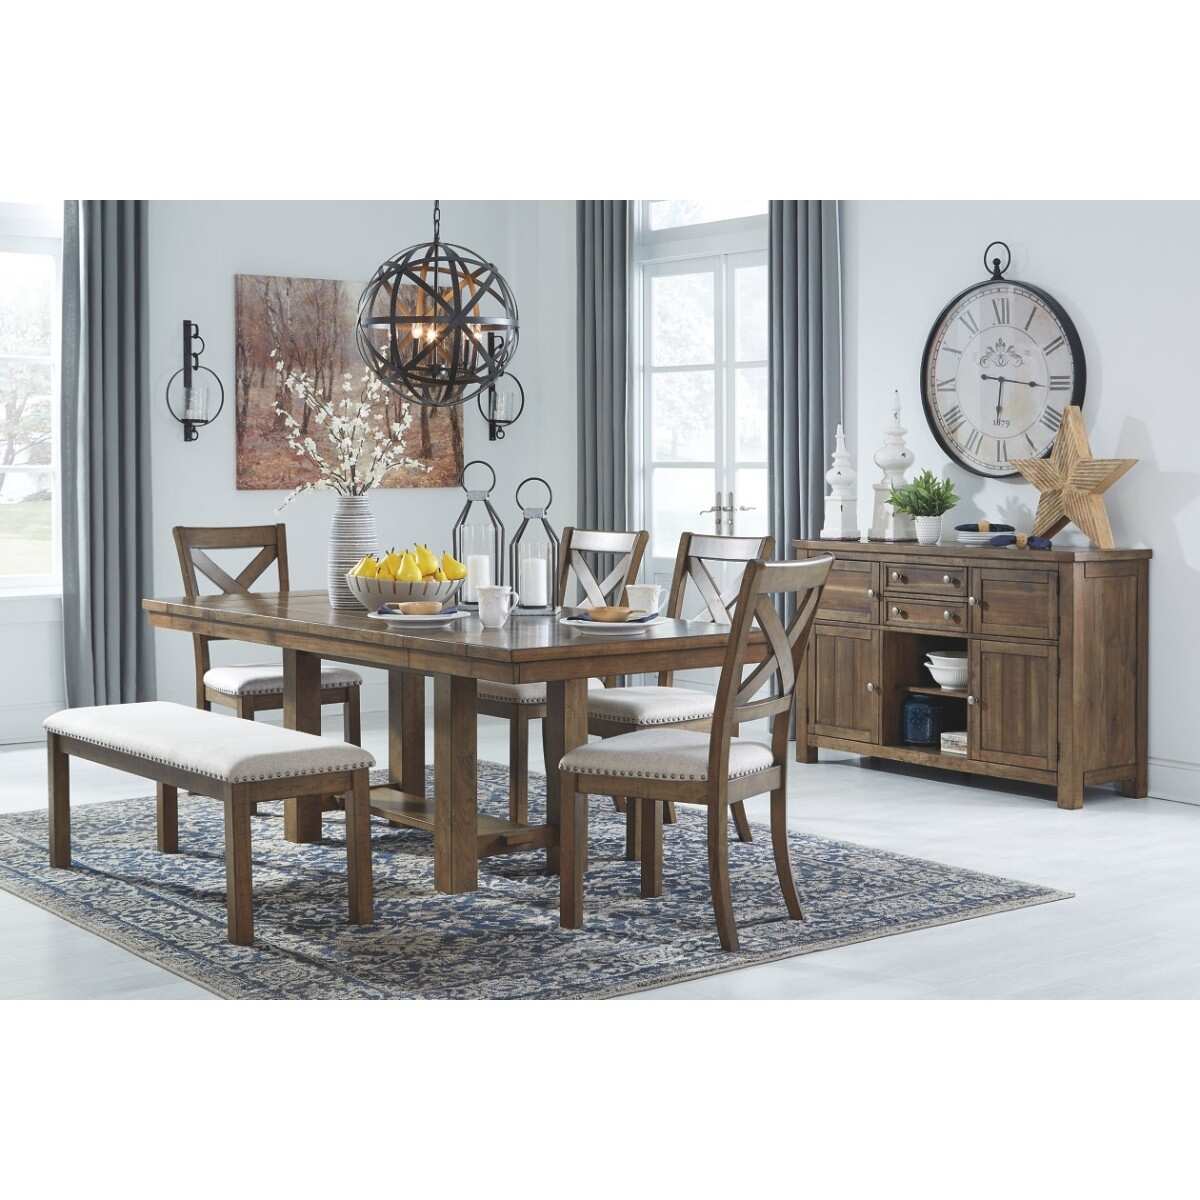 Rustic Style Acacia Wood Dining Table with Two Separate Extension Leaves, Brown